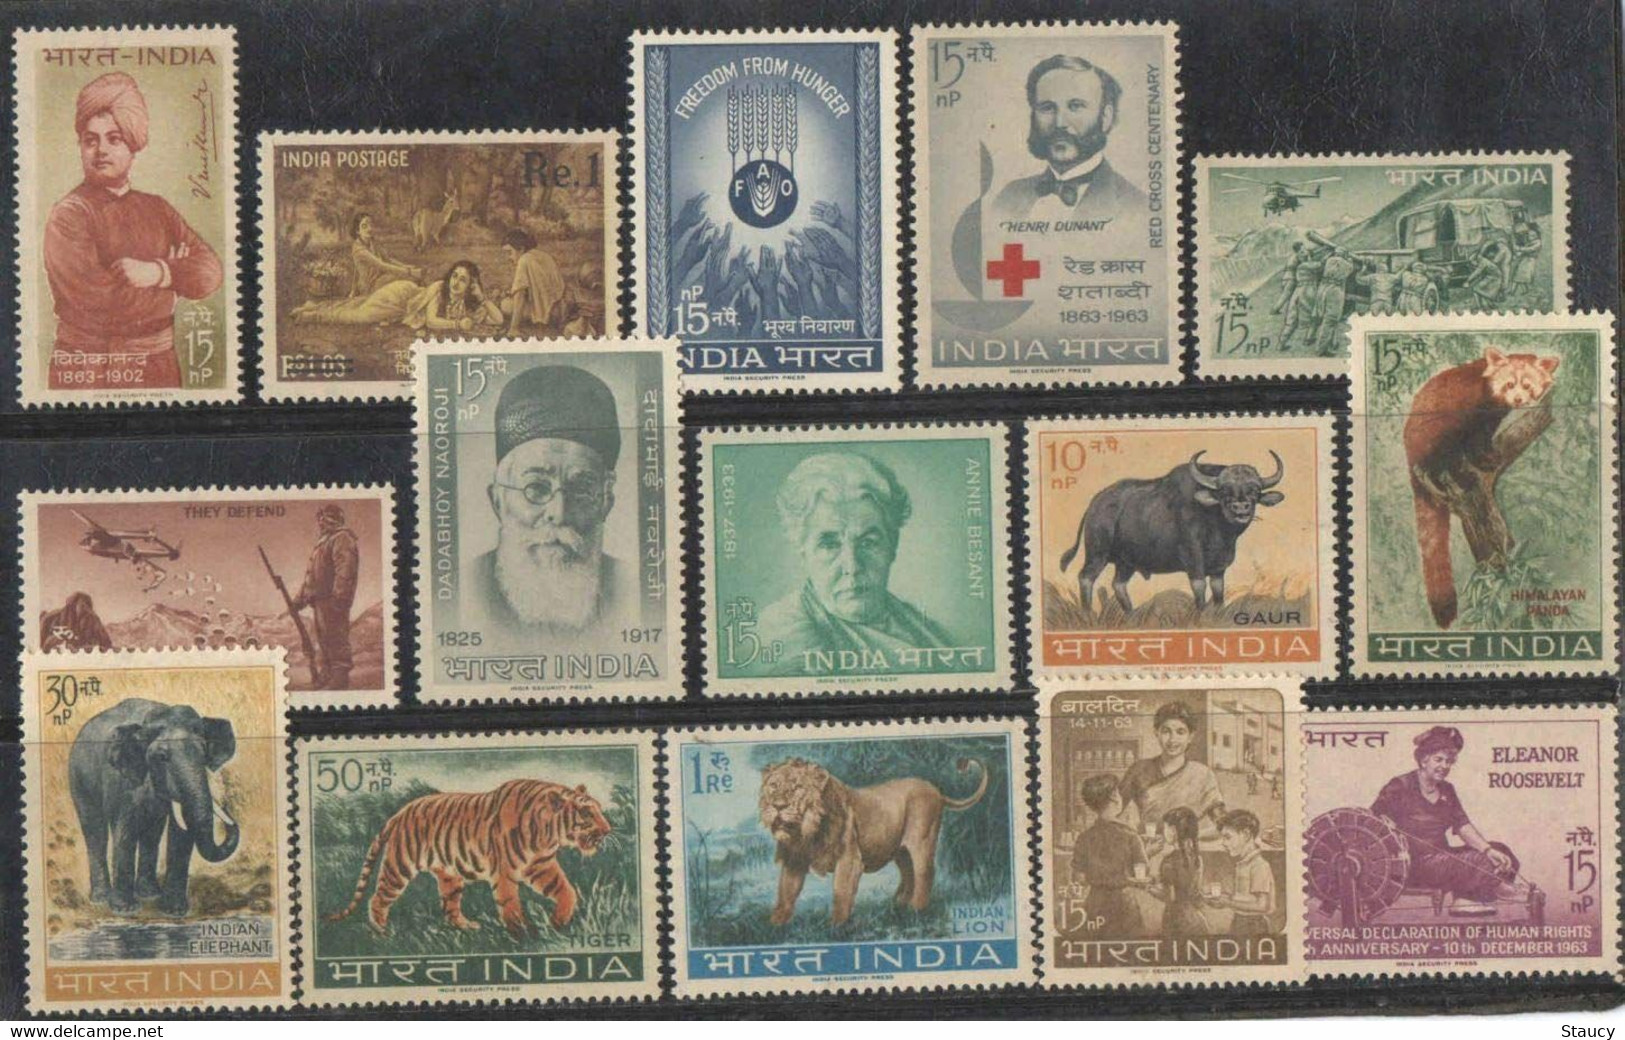 India 1963 Complete Year Pack / Set / Collection Total 15 Stamps (No Missing) MNH As Per Scan - Ungebraucht